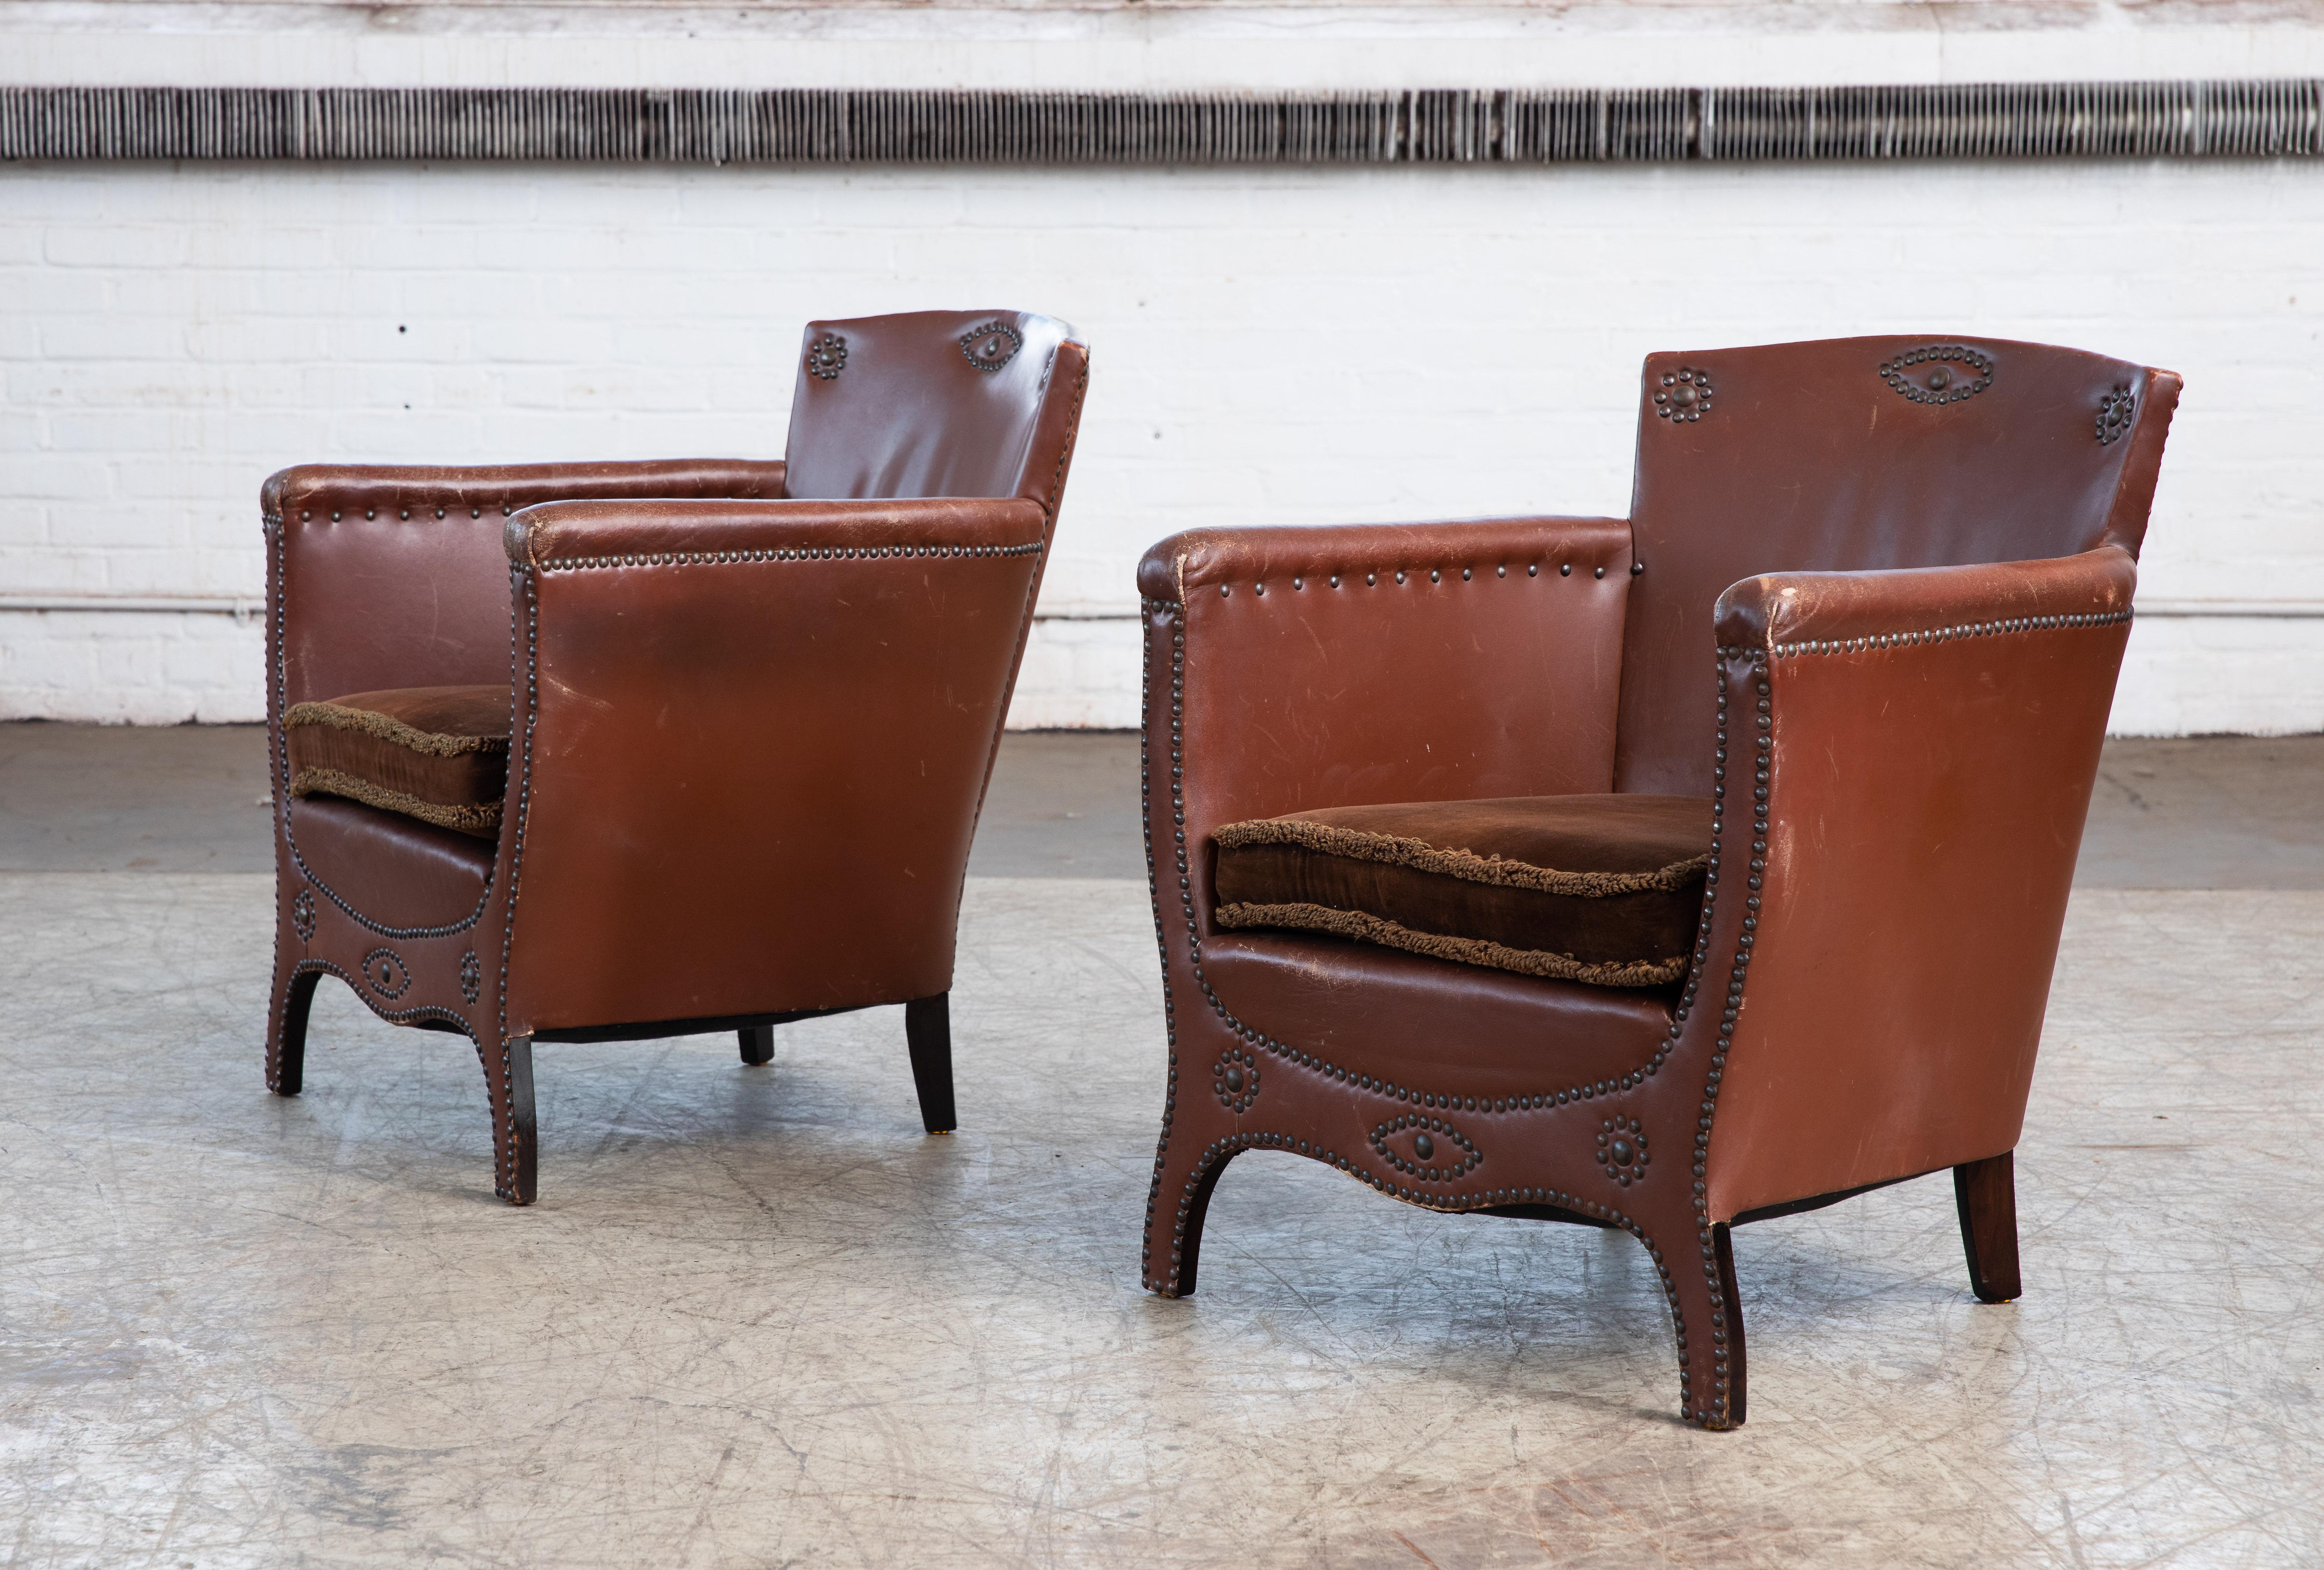 Scandinavian Modern Otto Schulz 1940s Pair of Mid-Century Baroque Lounge Chairs in Leather